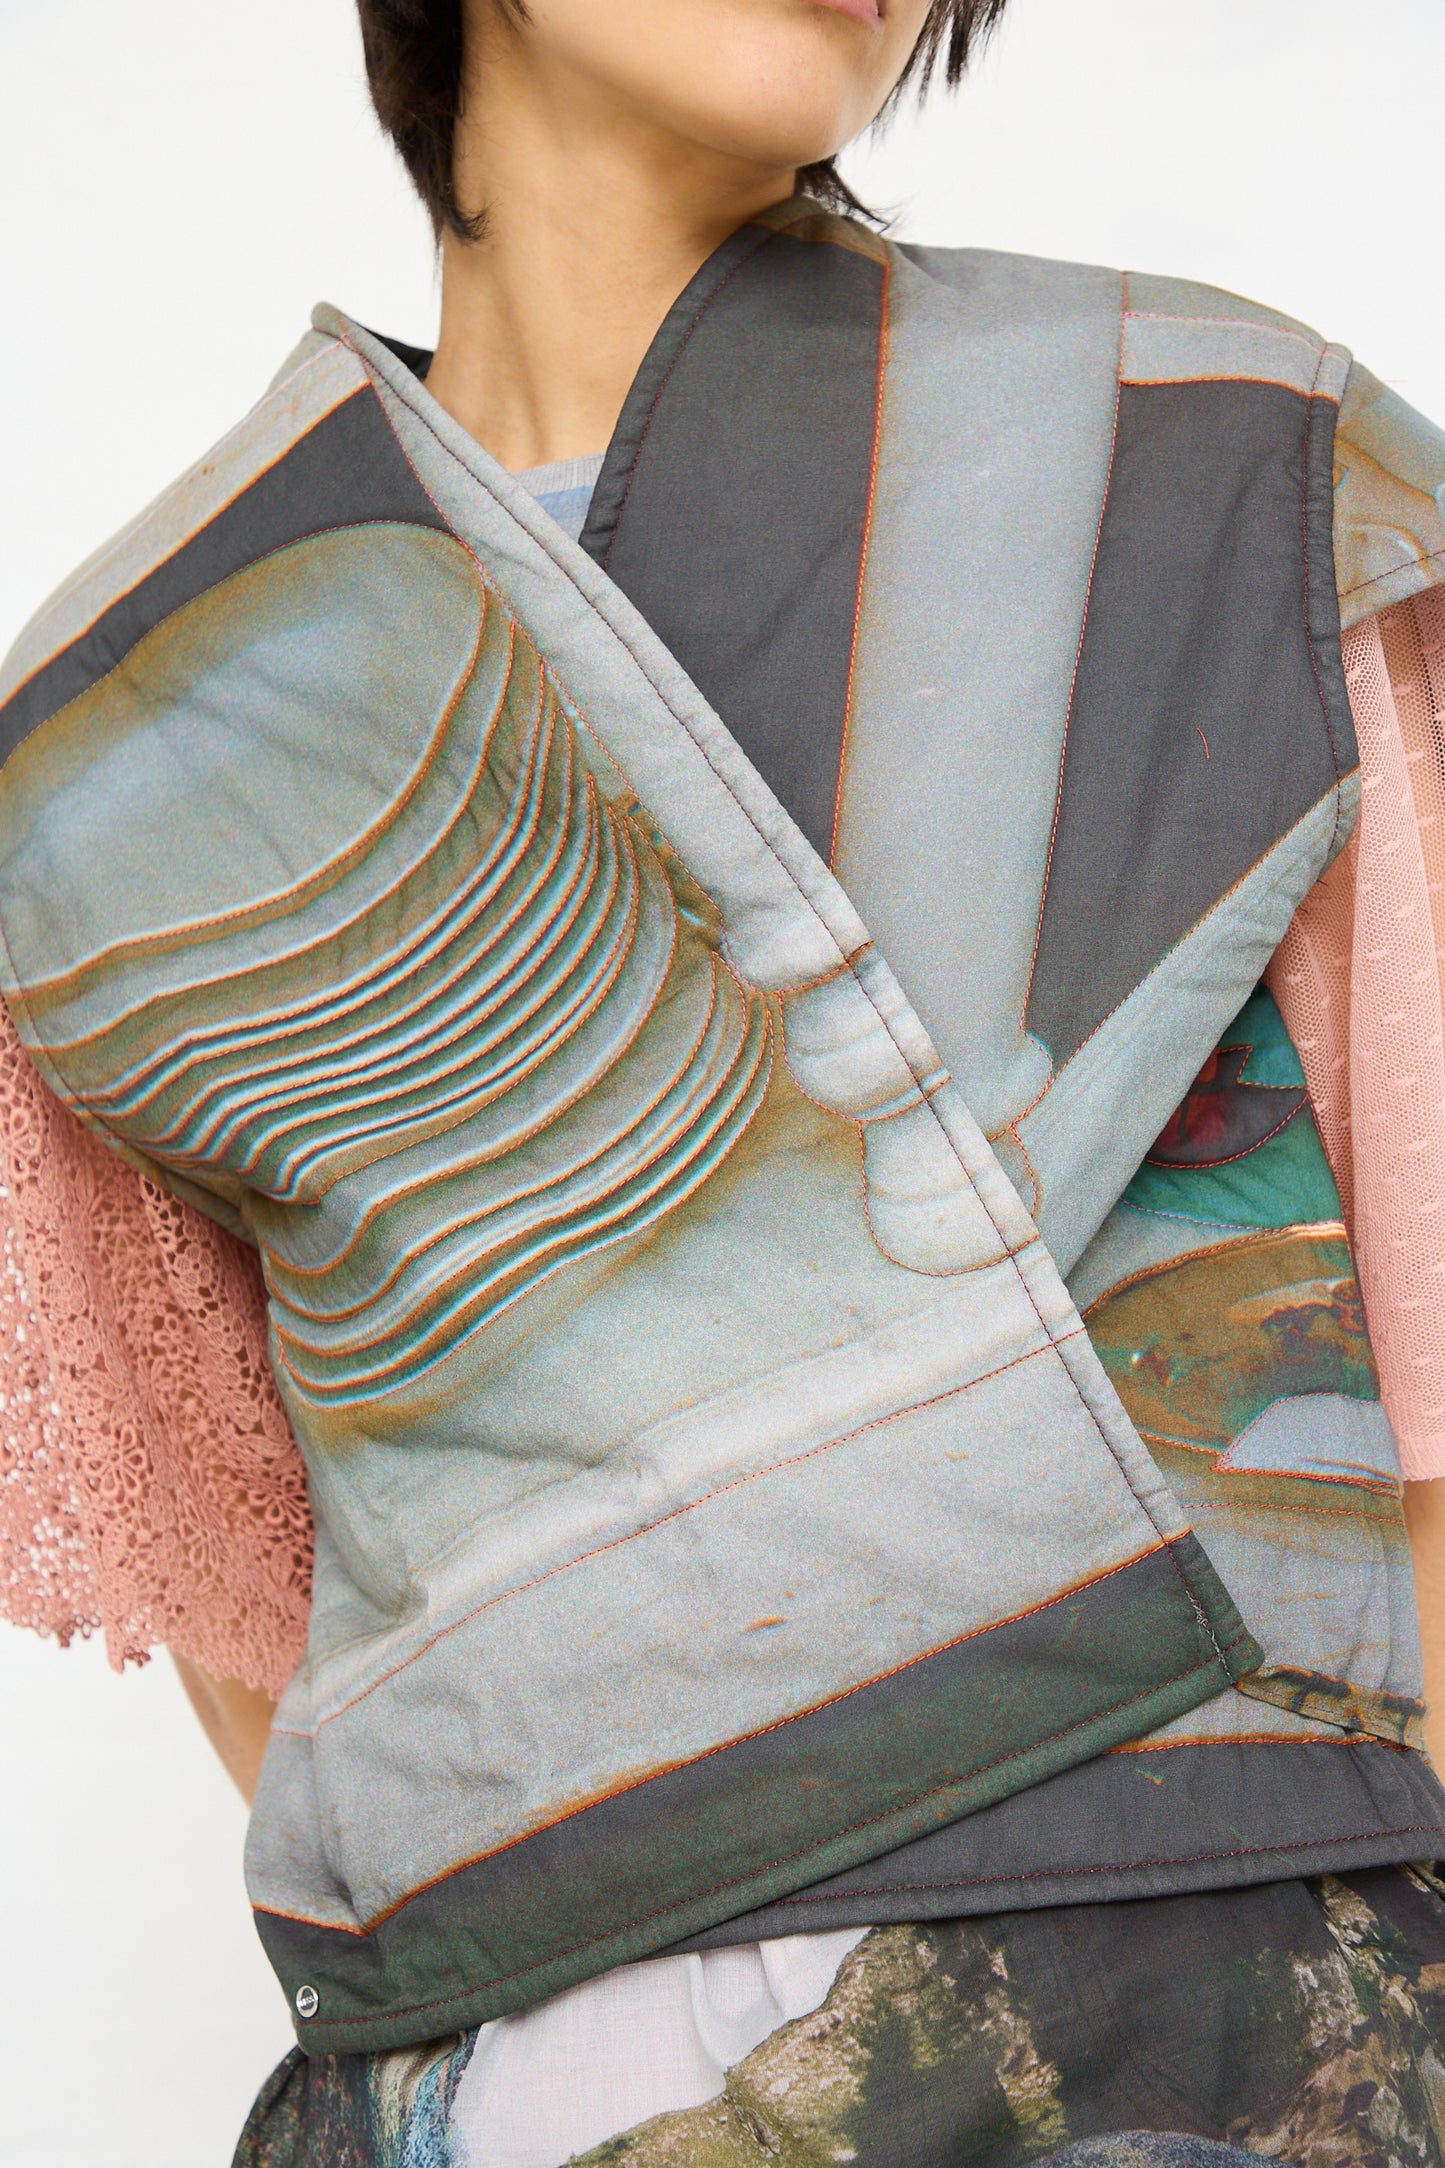 Woman wearing a Bless Cotton No. 77 Summer Living Vest in Print with layered fabric details over a multi-colored blouse.